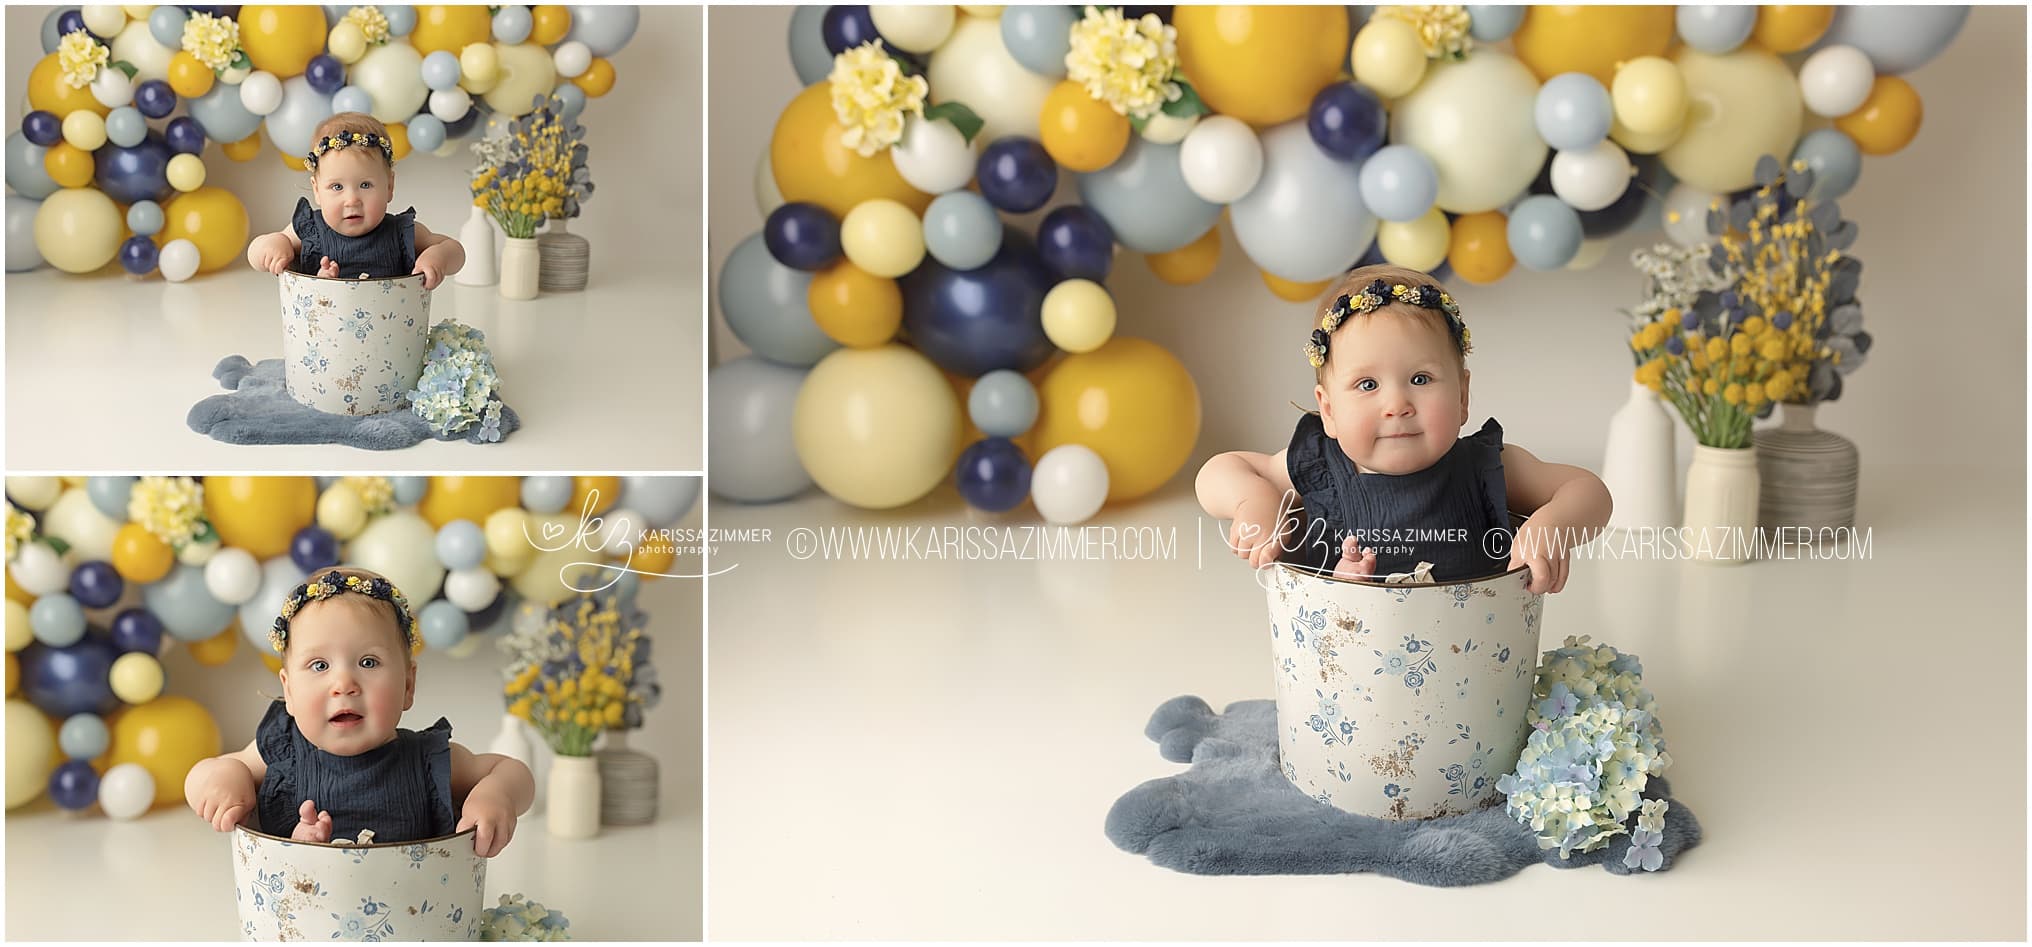 Baby's First Birthday Photoshoot in Camp Hill PA photography studio